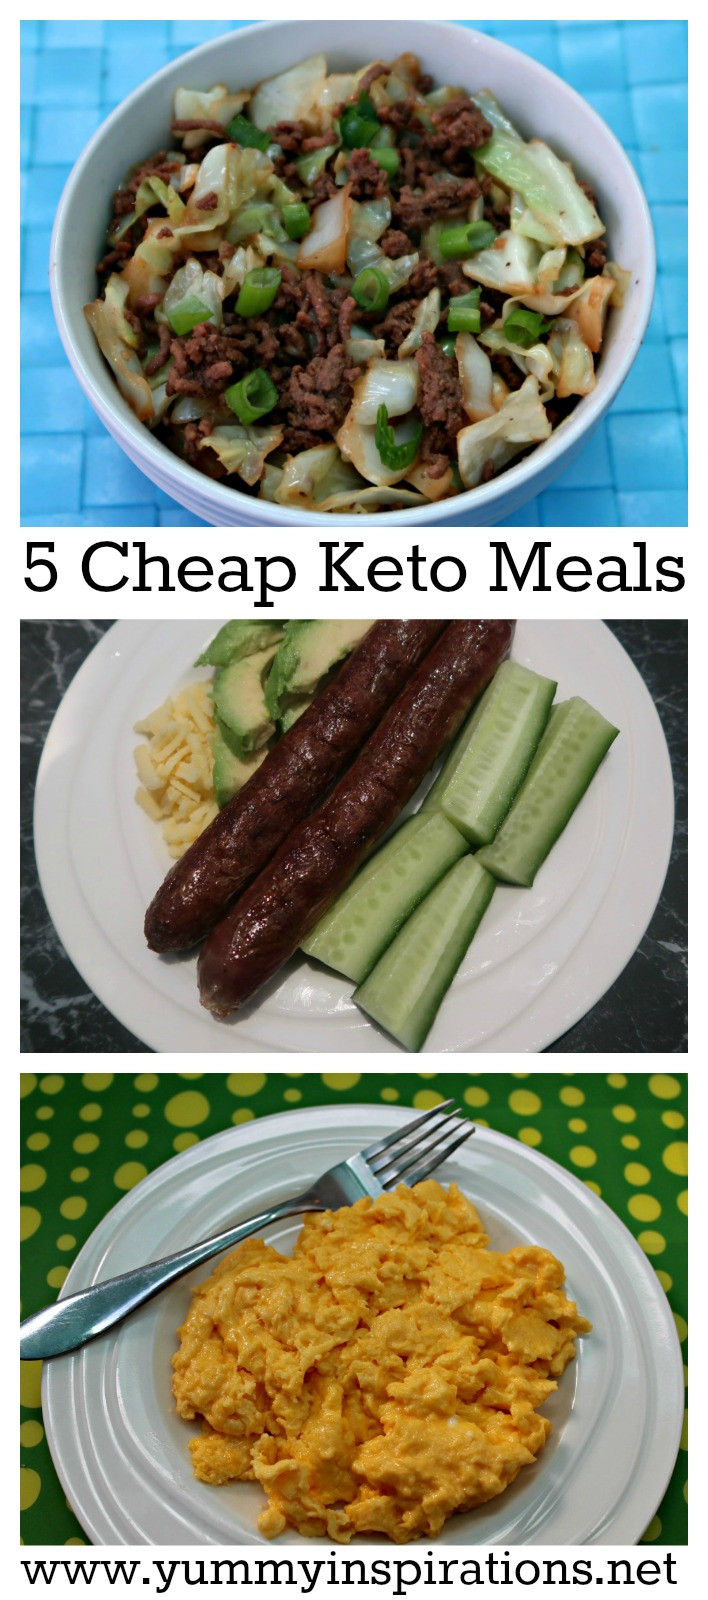 Low Carb Keto Recipes Ketogenic Diet
 5 Cheap Keto Meals Low Carb Keto Diet Foods A Bud